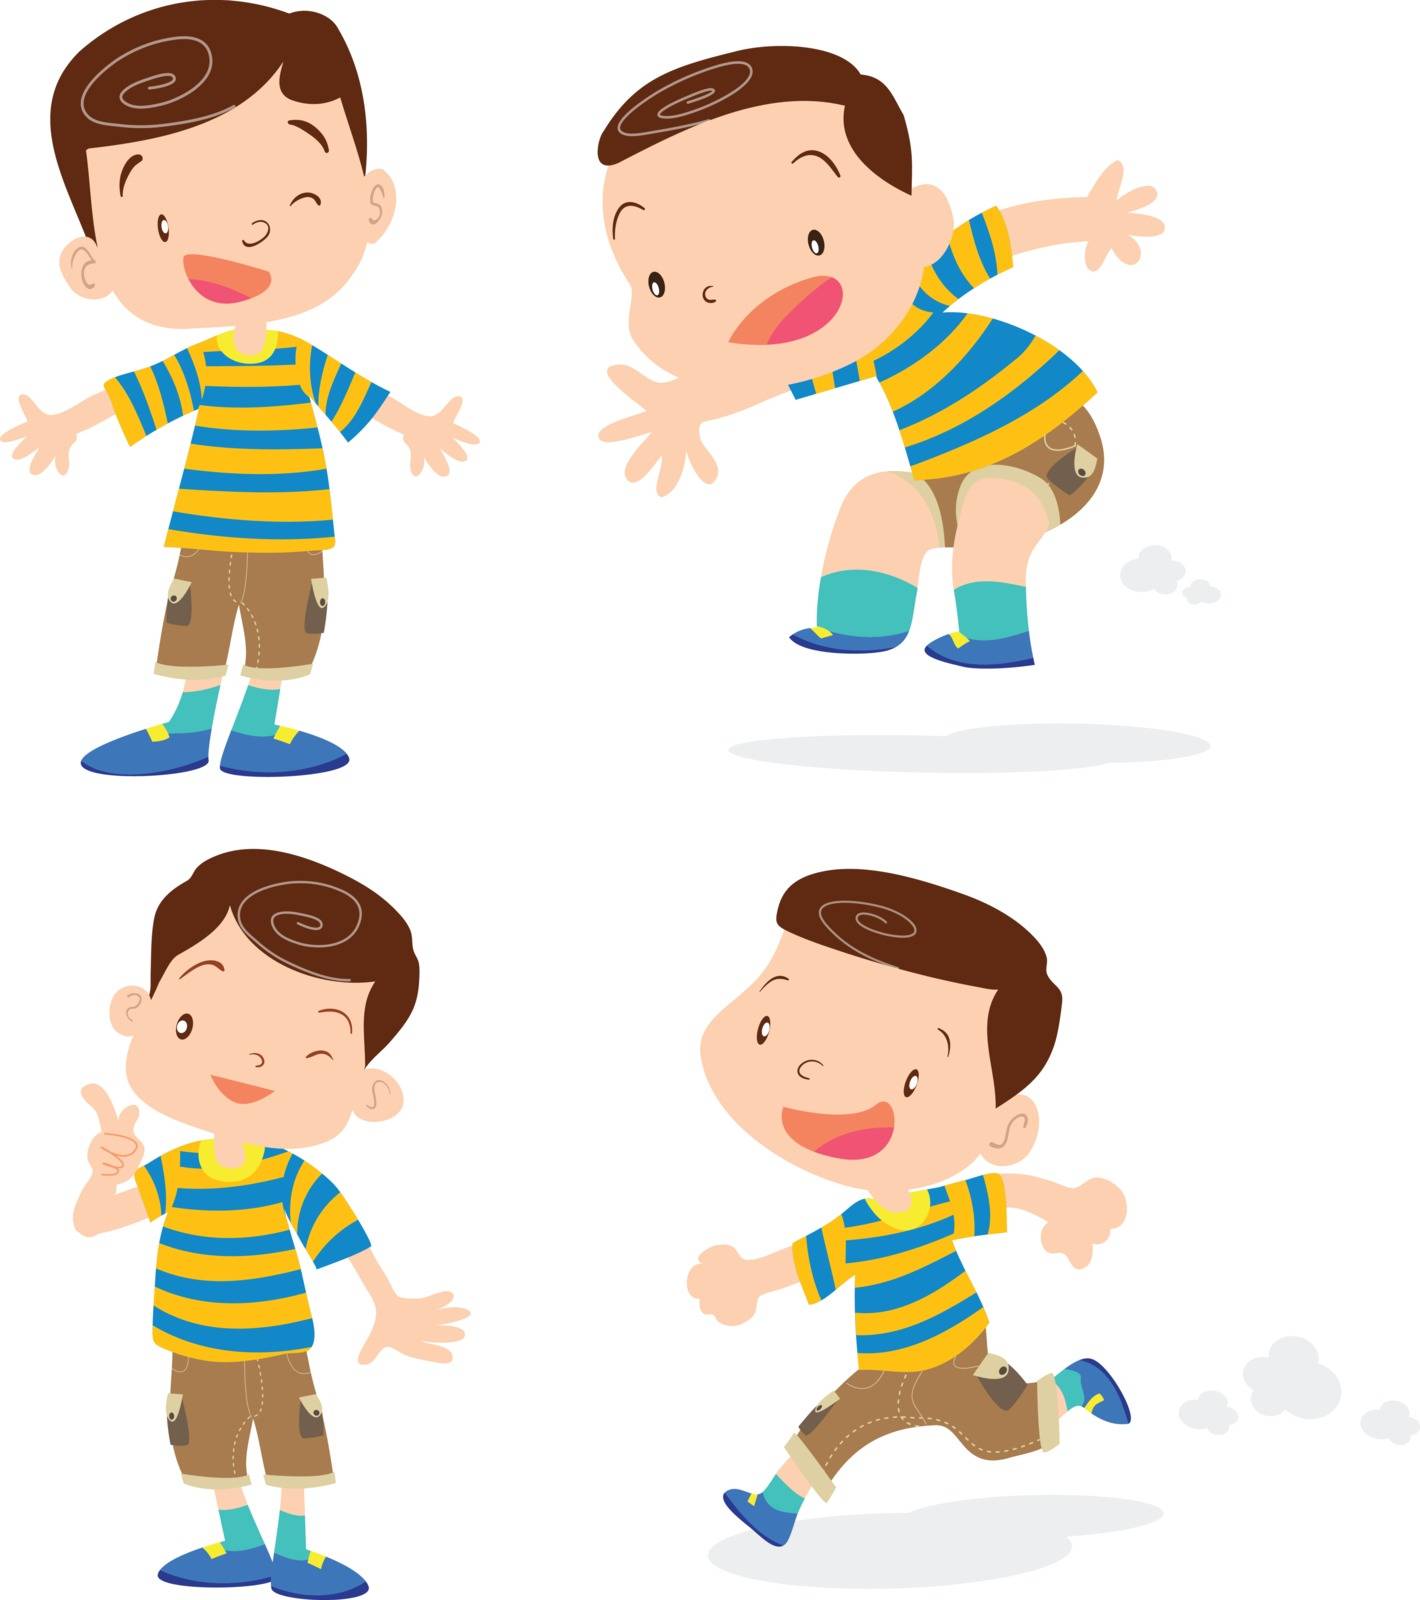 Cute boy character cartoon action. by niwat_s@hotmail.com